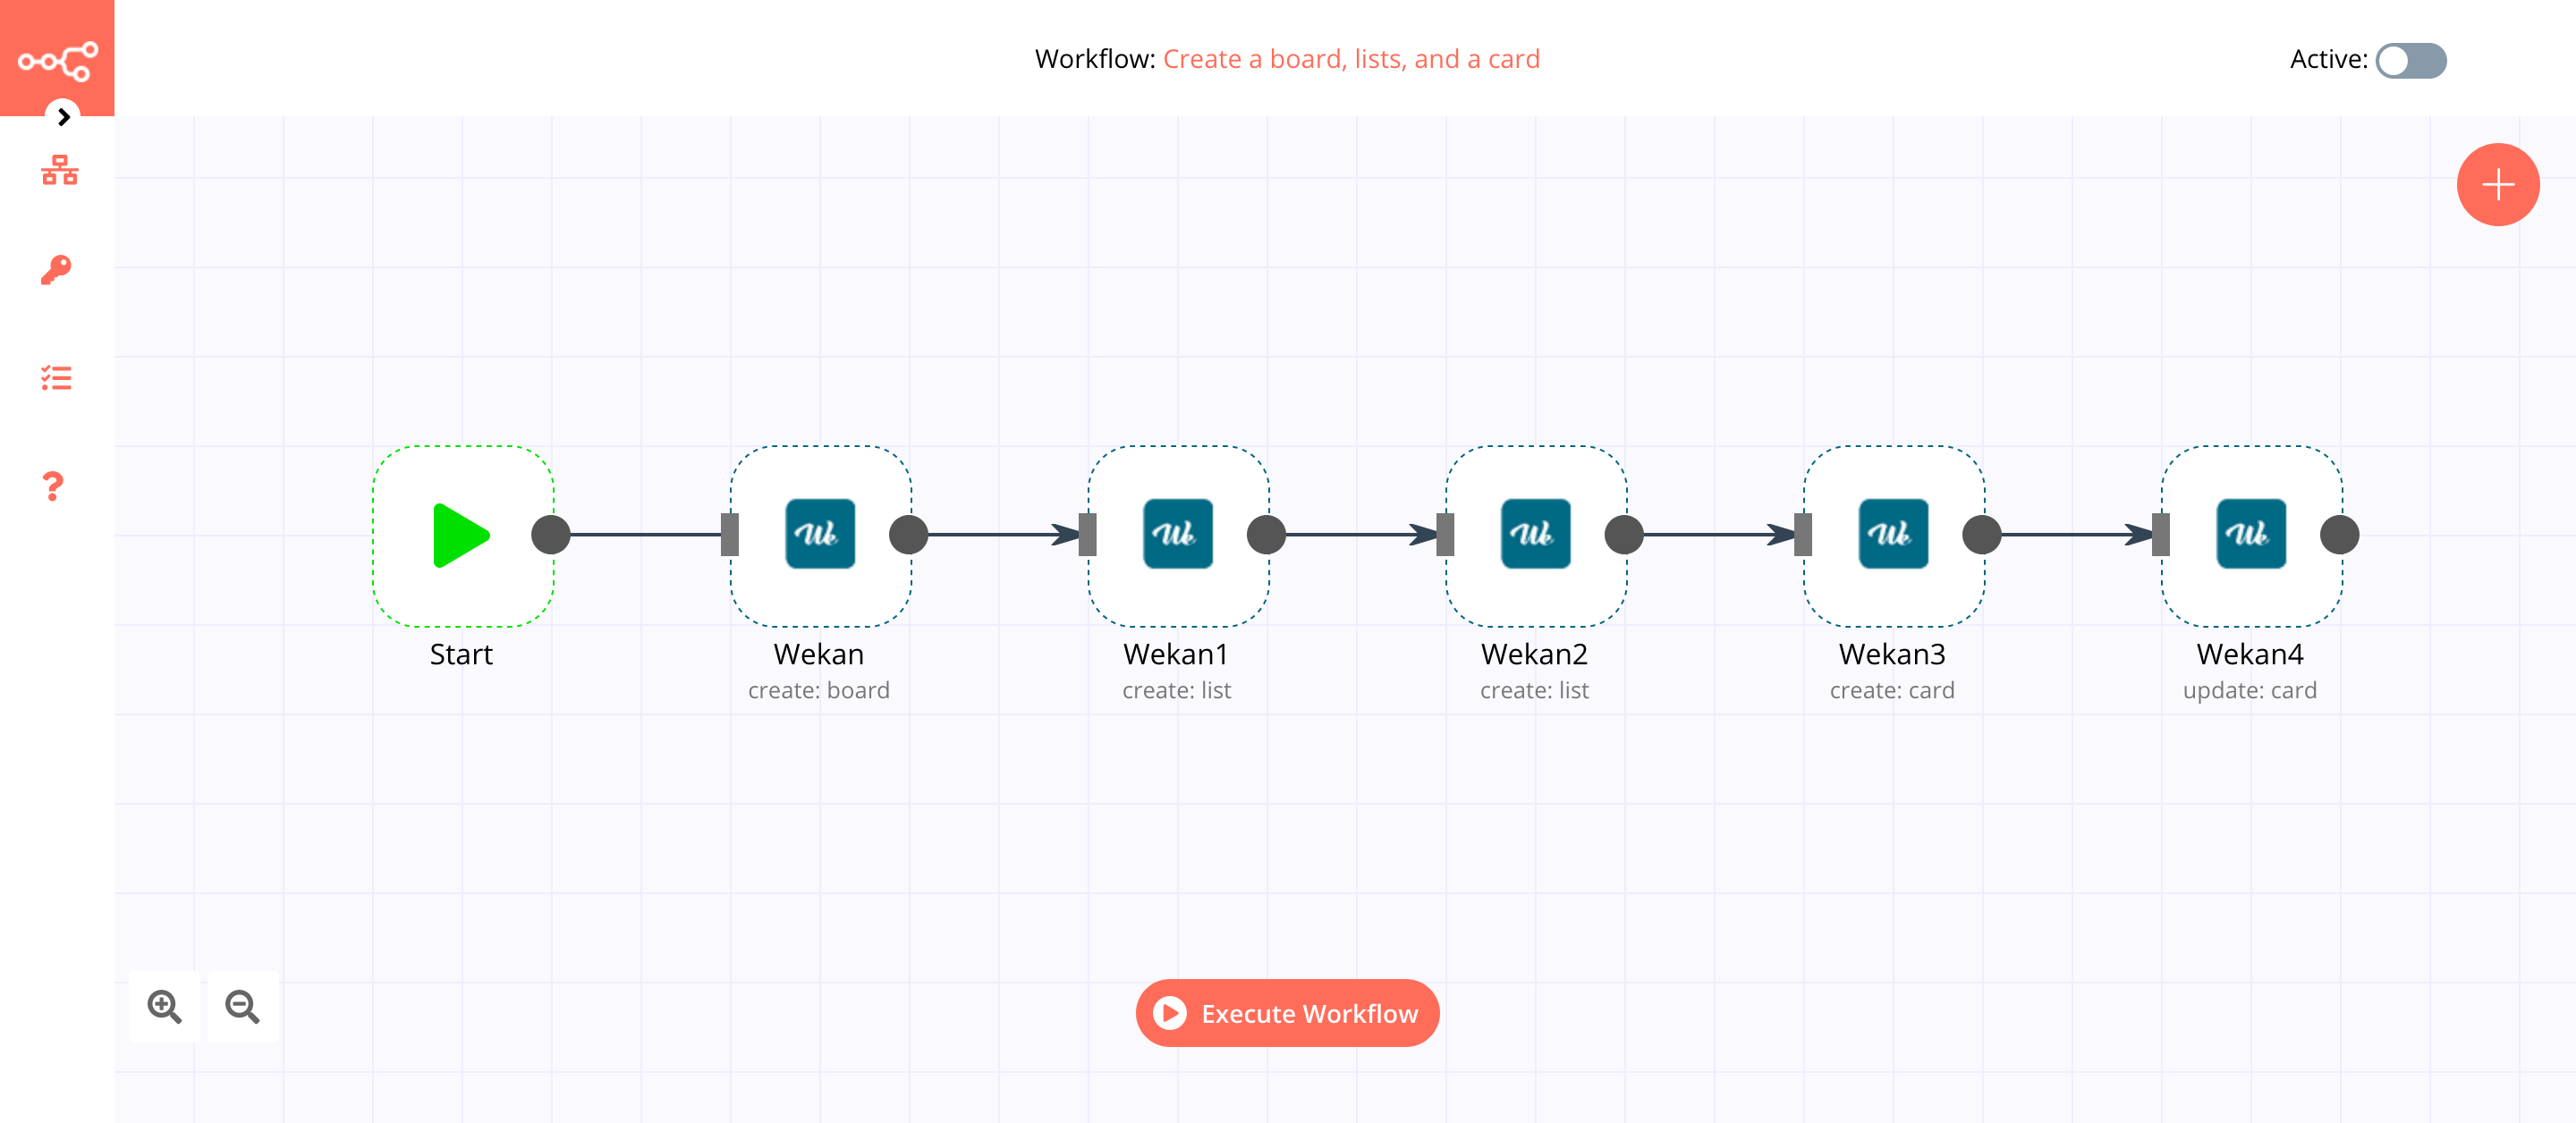 A workflow with the Wekan node